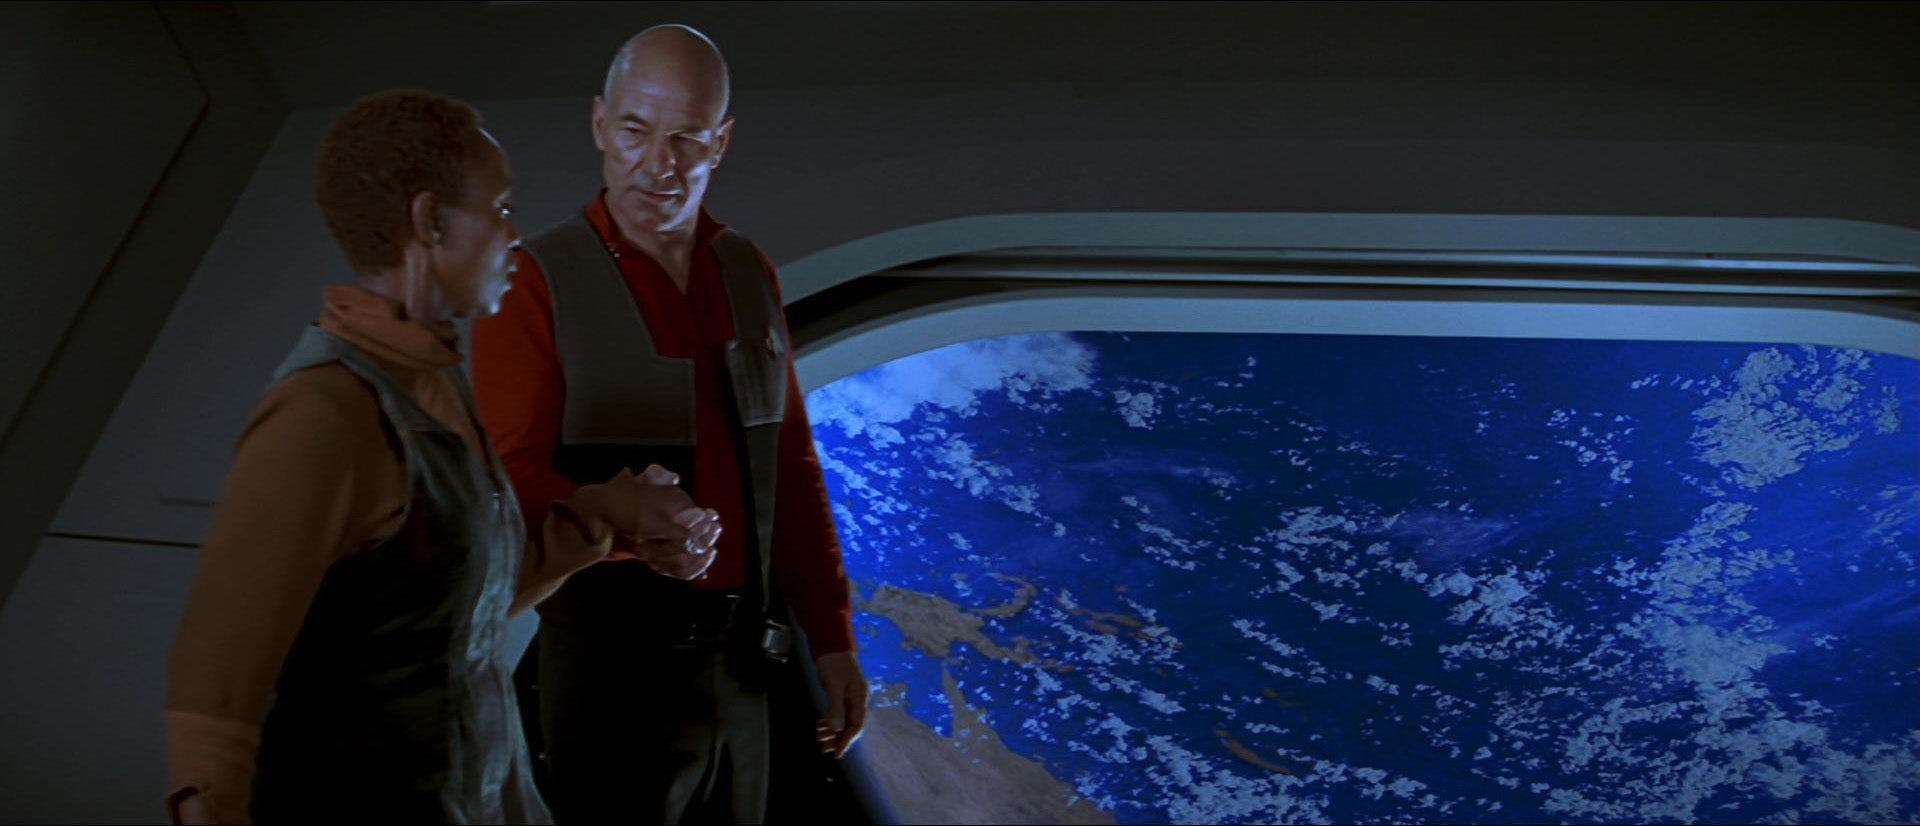 Picard holds Lily Sloane's hand as he escorts her around the Enterprise as she looks out the window at Earth below them in Star Trek: First Contact